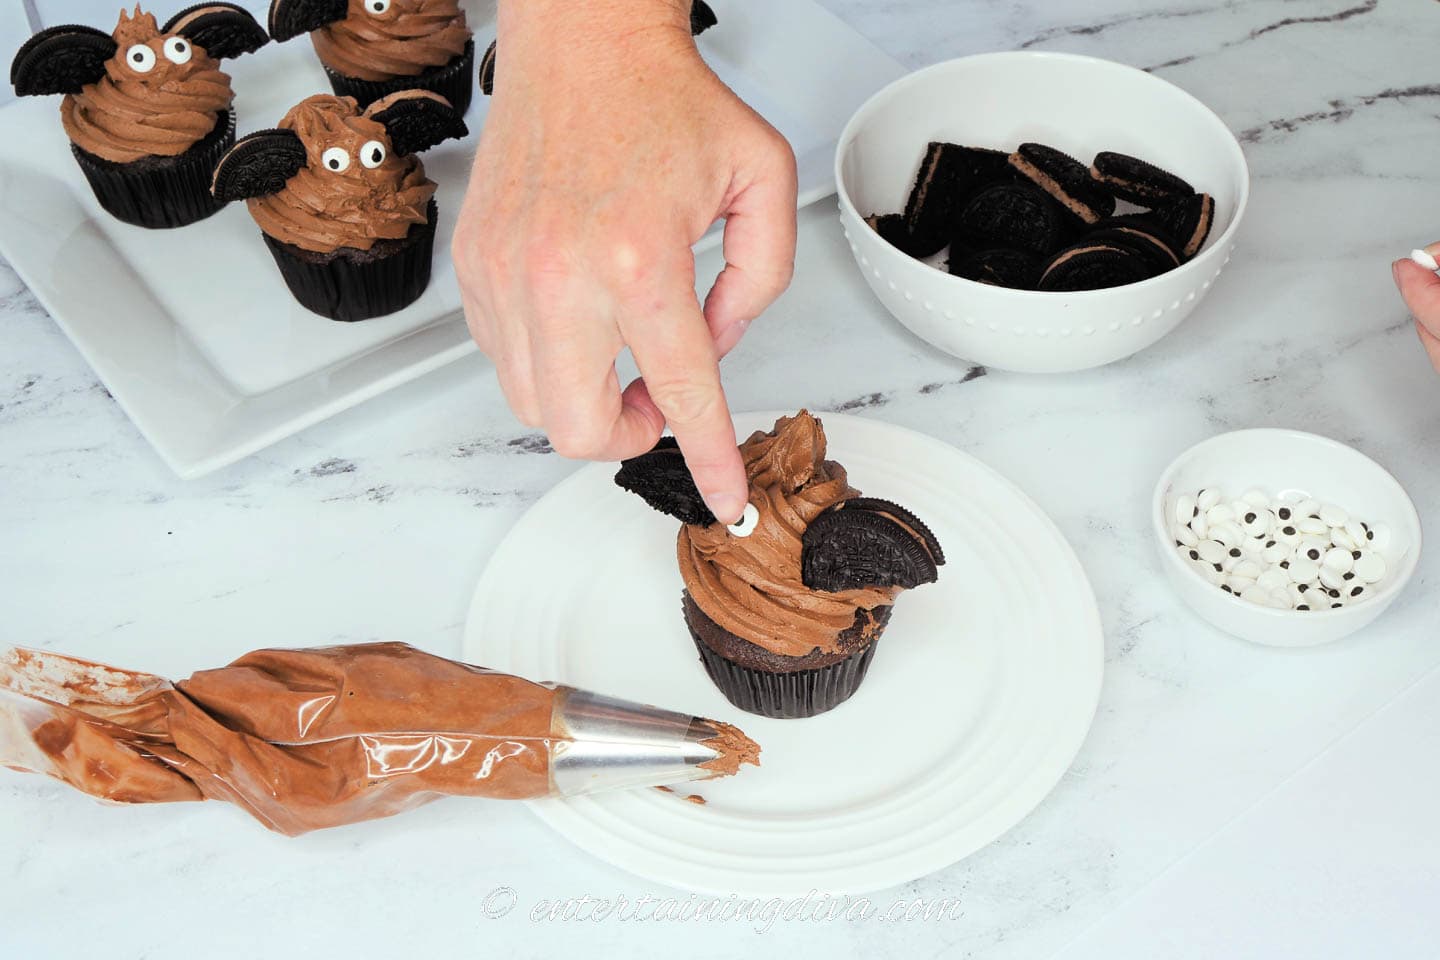 Candy eyes being stuck into the chocolate frosting between the Oreo cookie bat wings